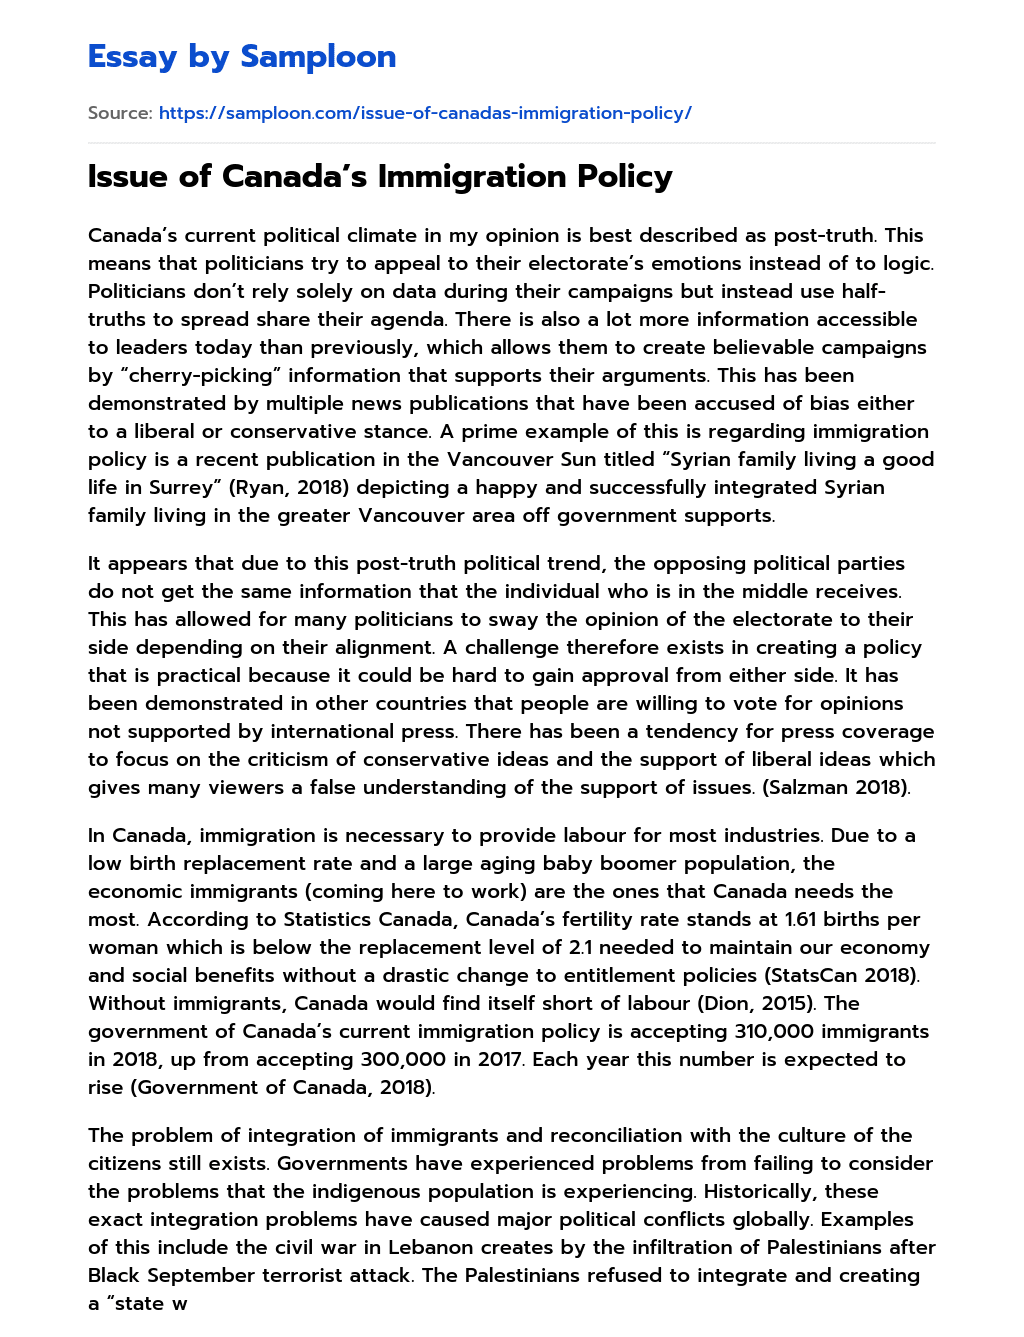 Issue of Canada’s Immigration Policy essay